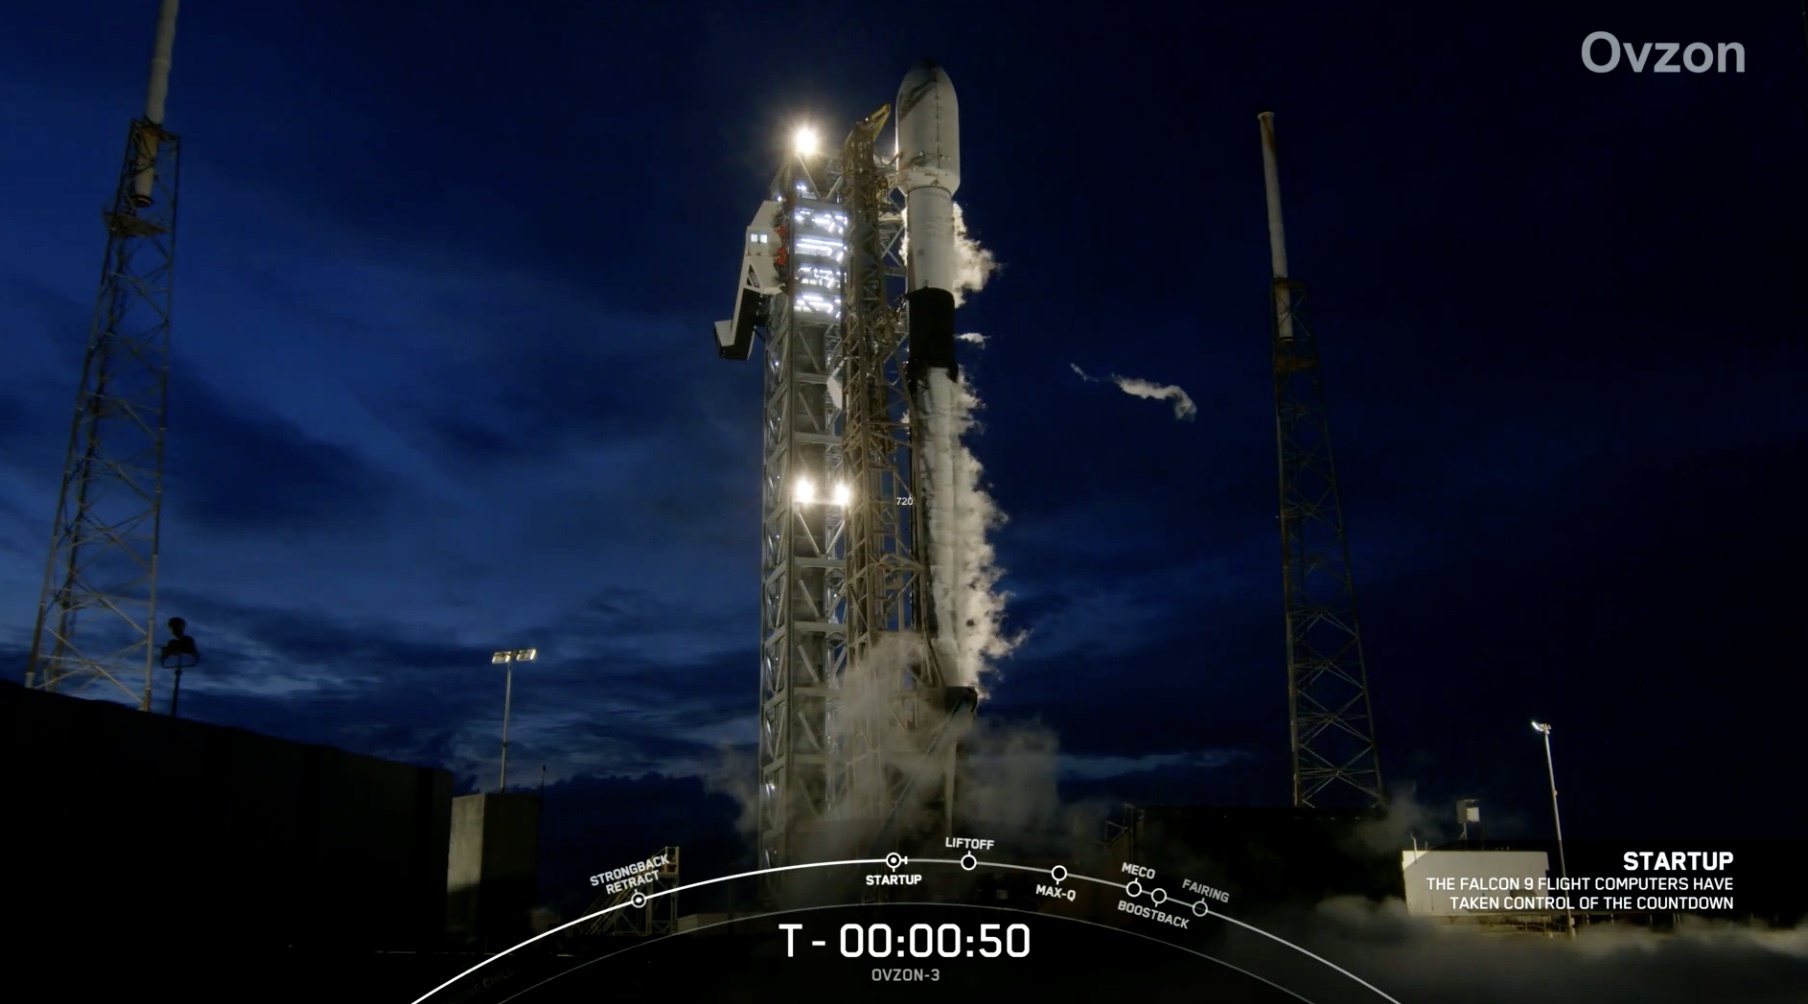 spacex-falcon9-ovzon3-mission-ah